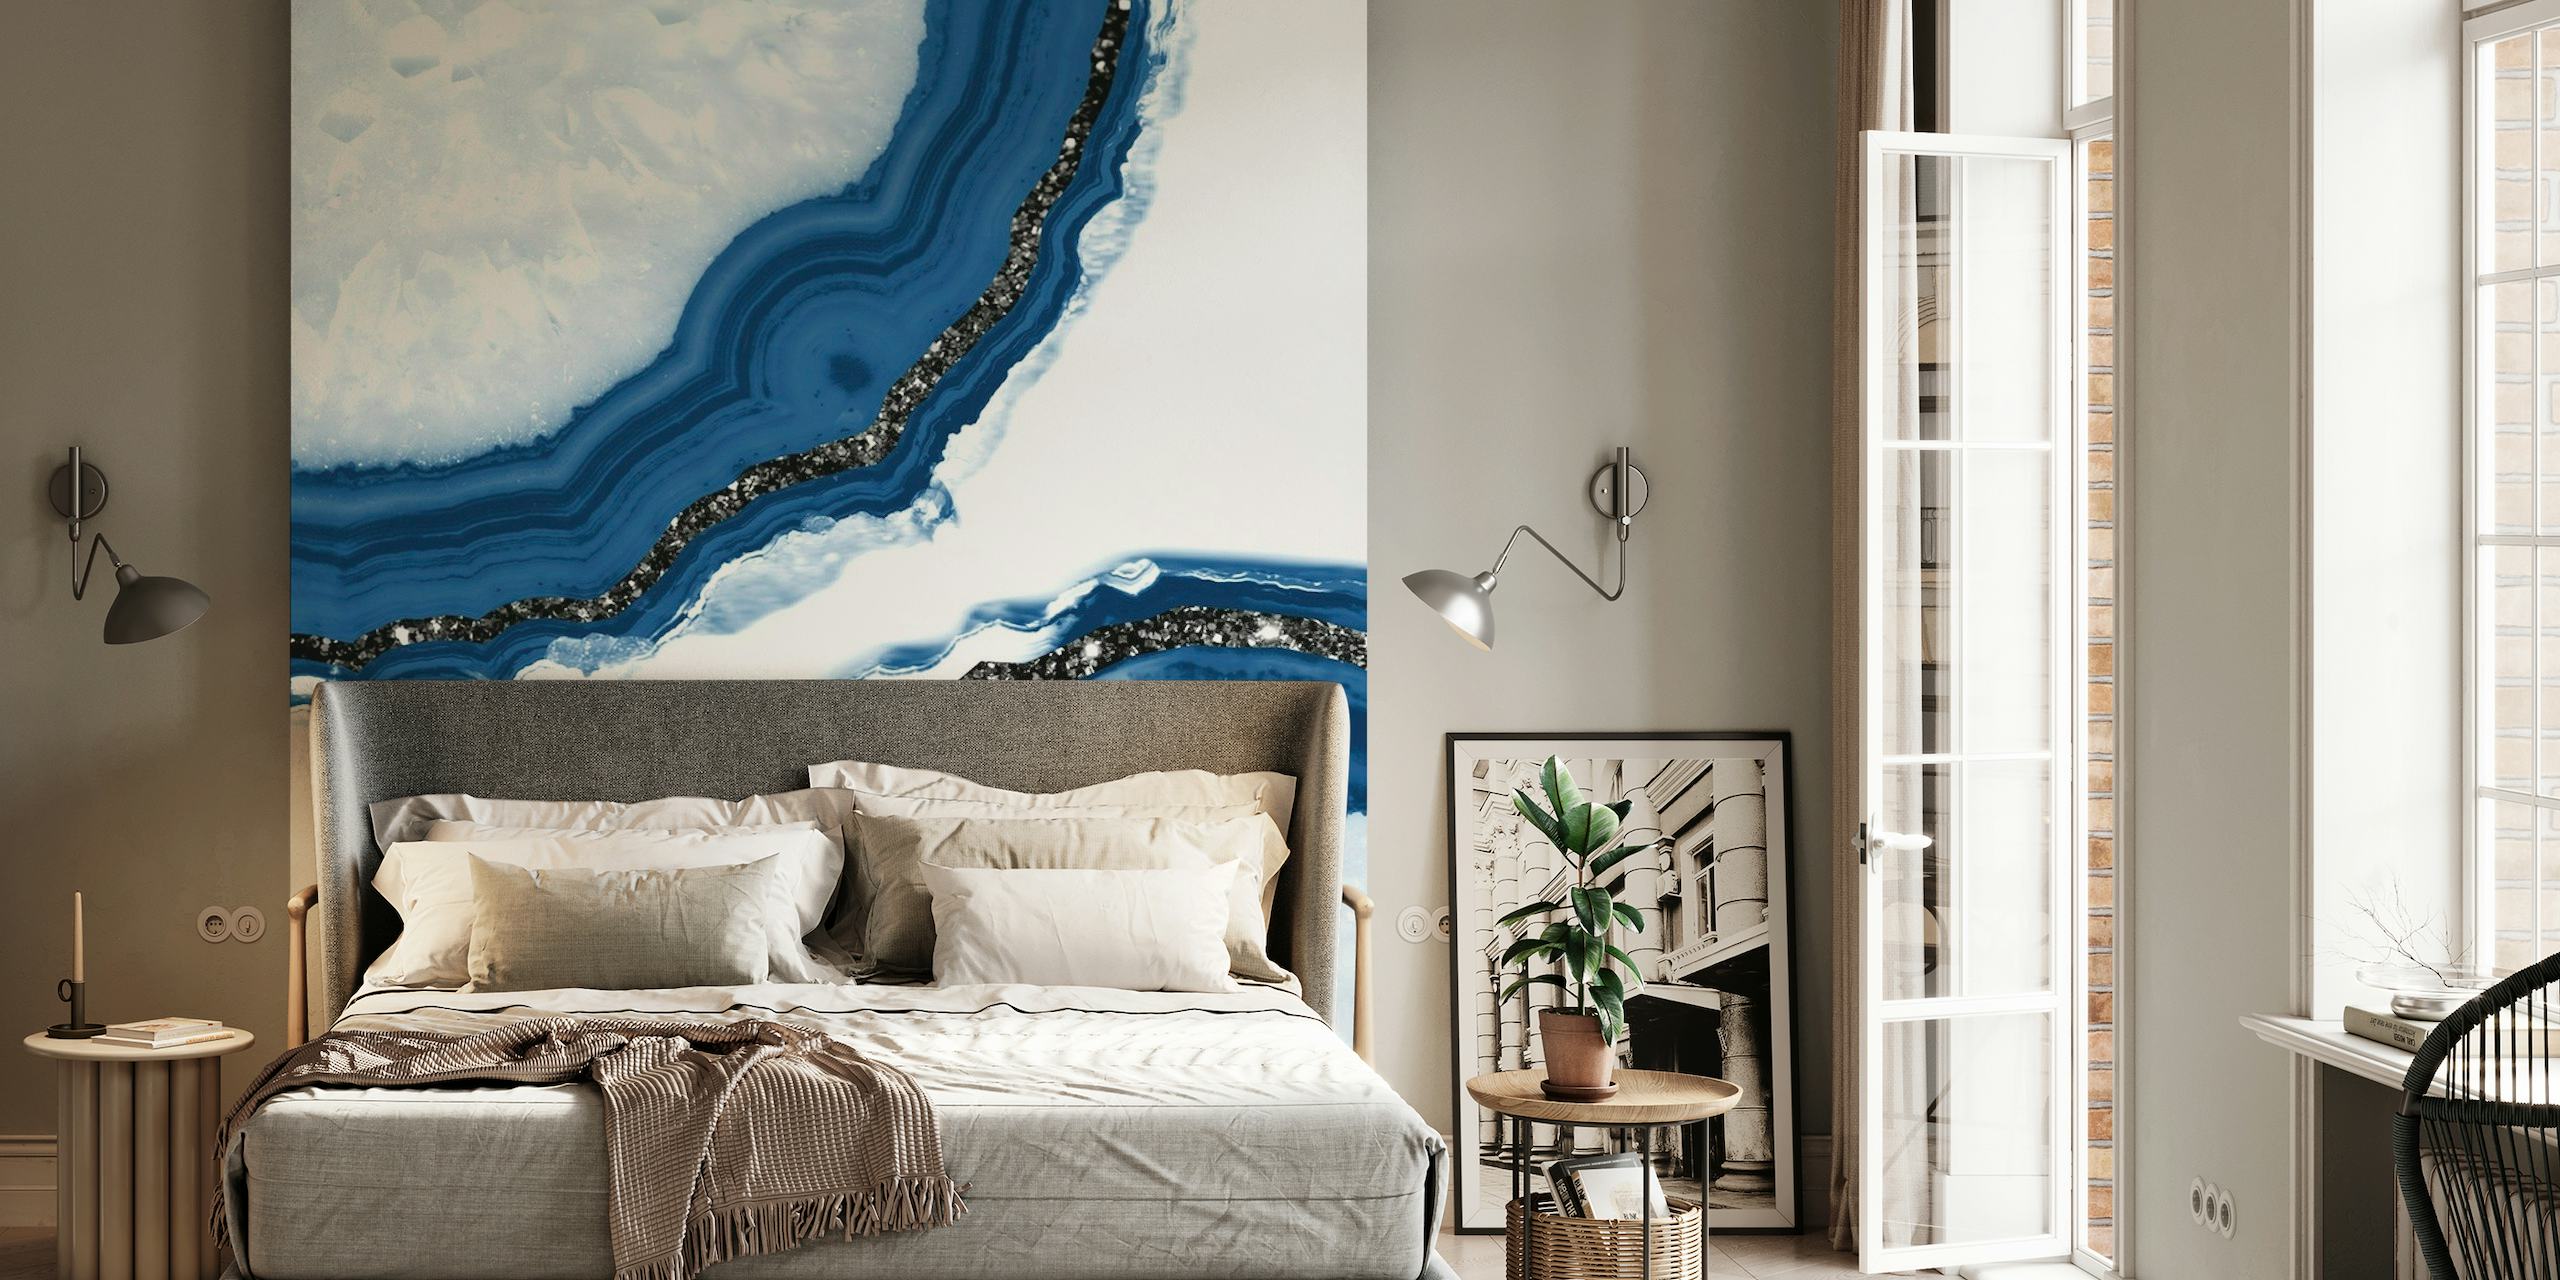 Elegant agate-inspired wall mural with blue and white patterns and glitter accents